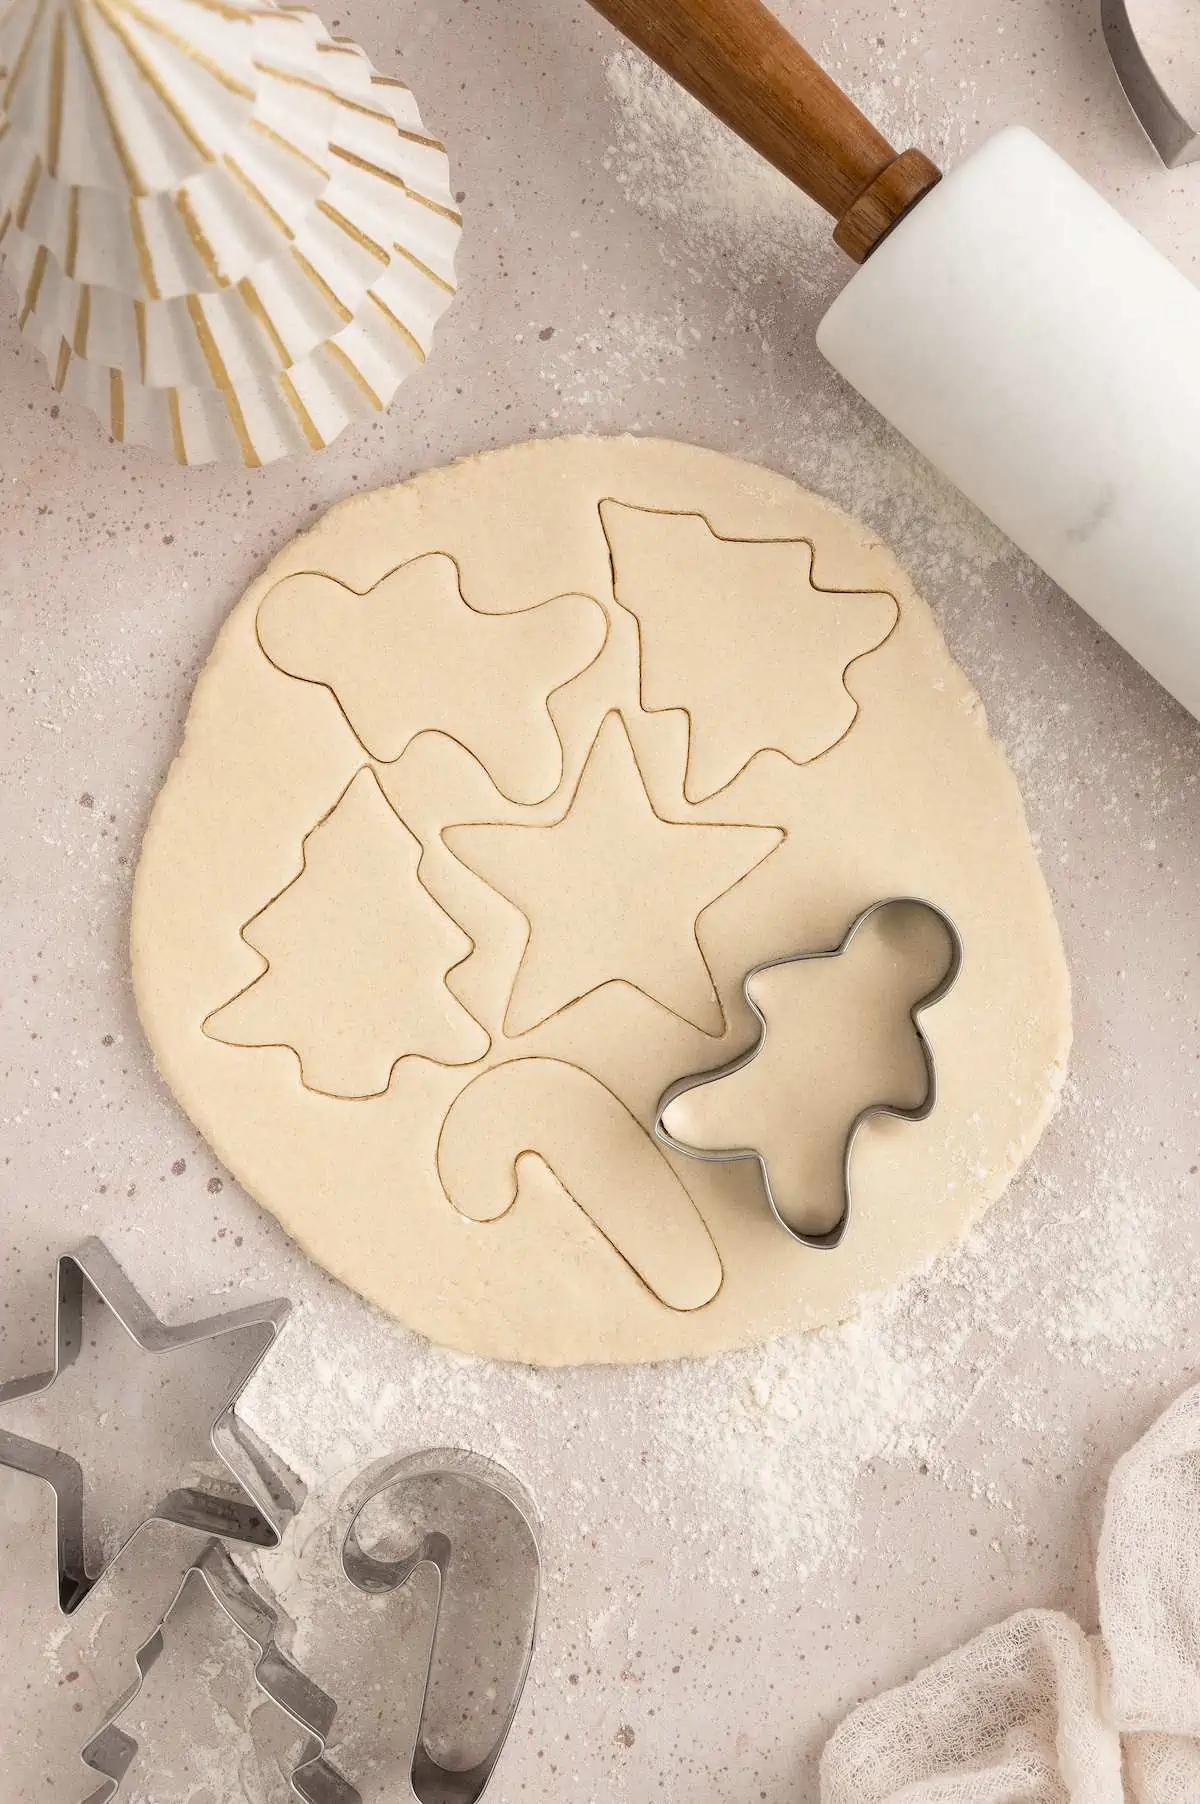 Salt dough rolled flat with cookie cutter placed on top.